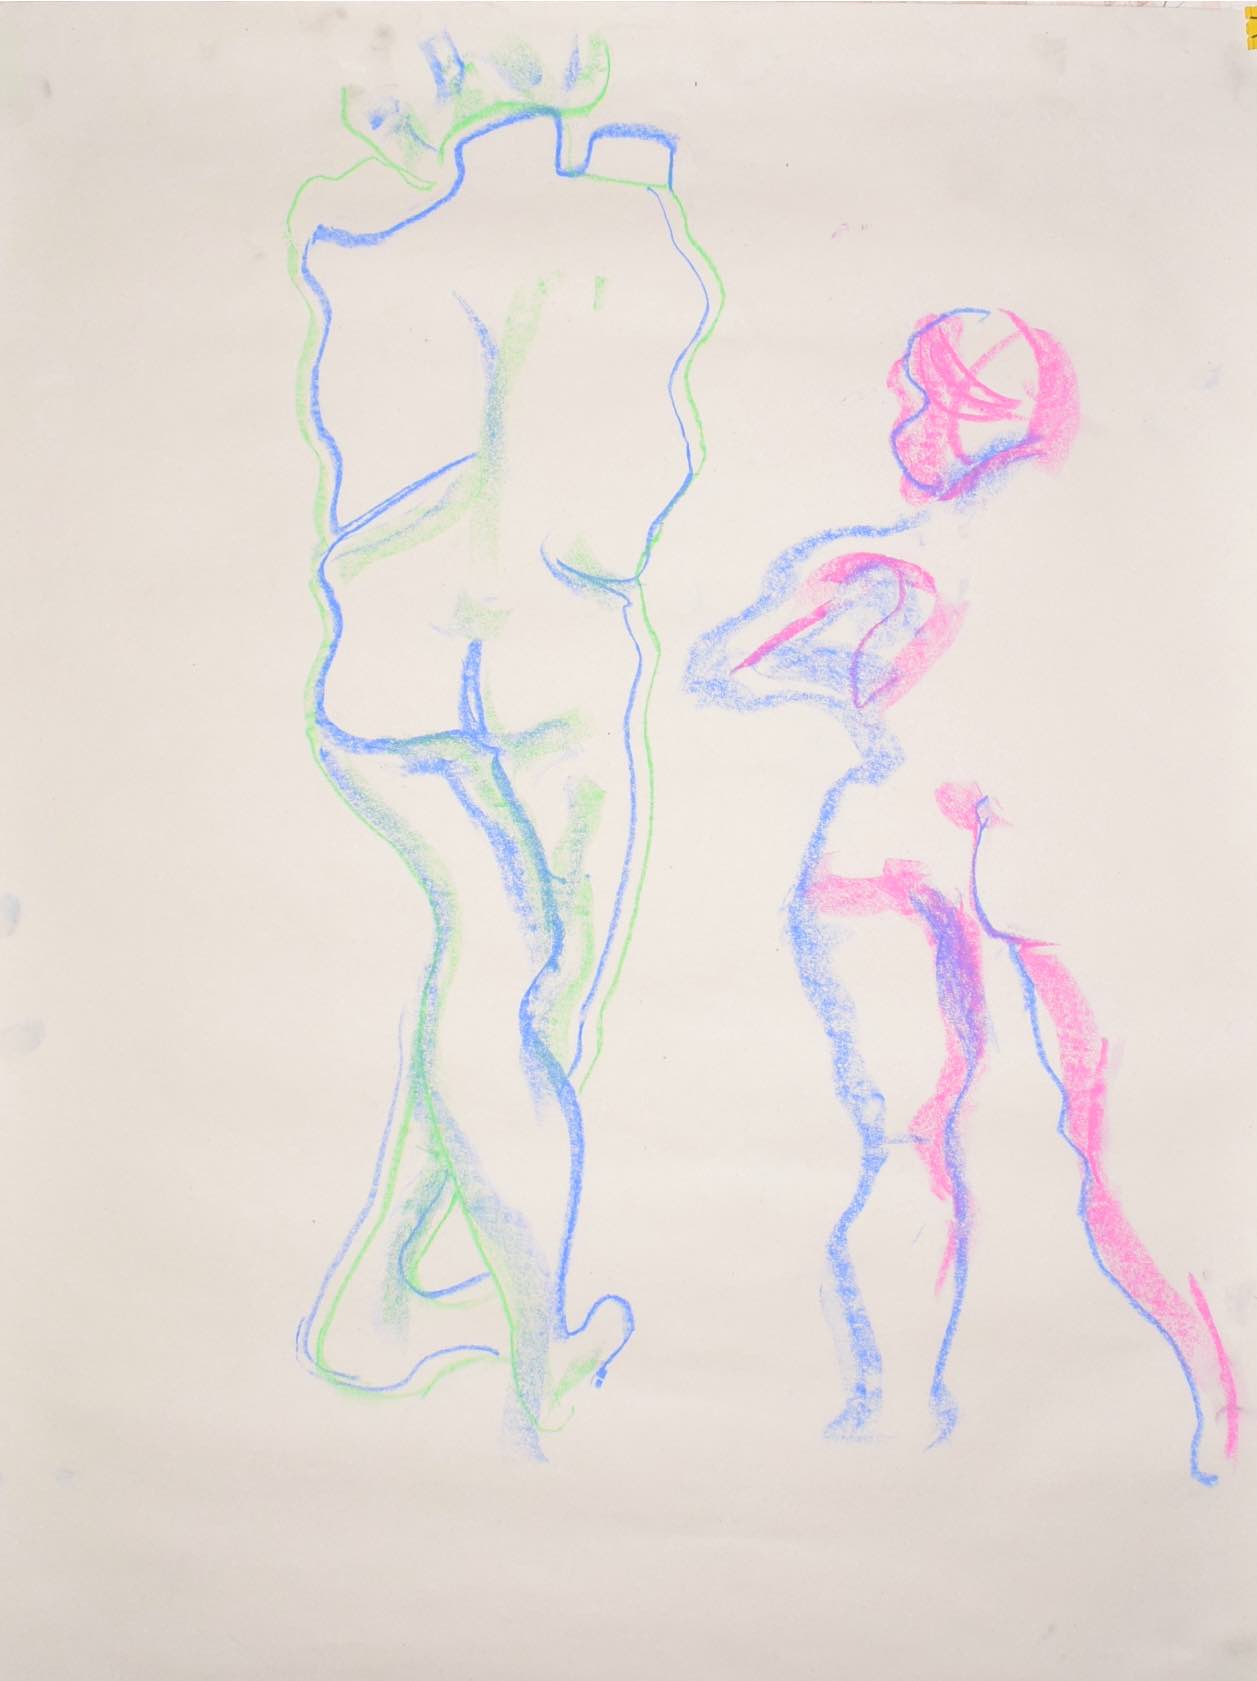 Coloured chalk drawings of women from behind